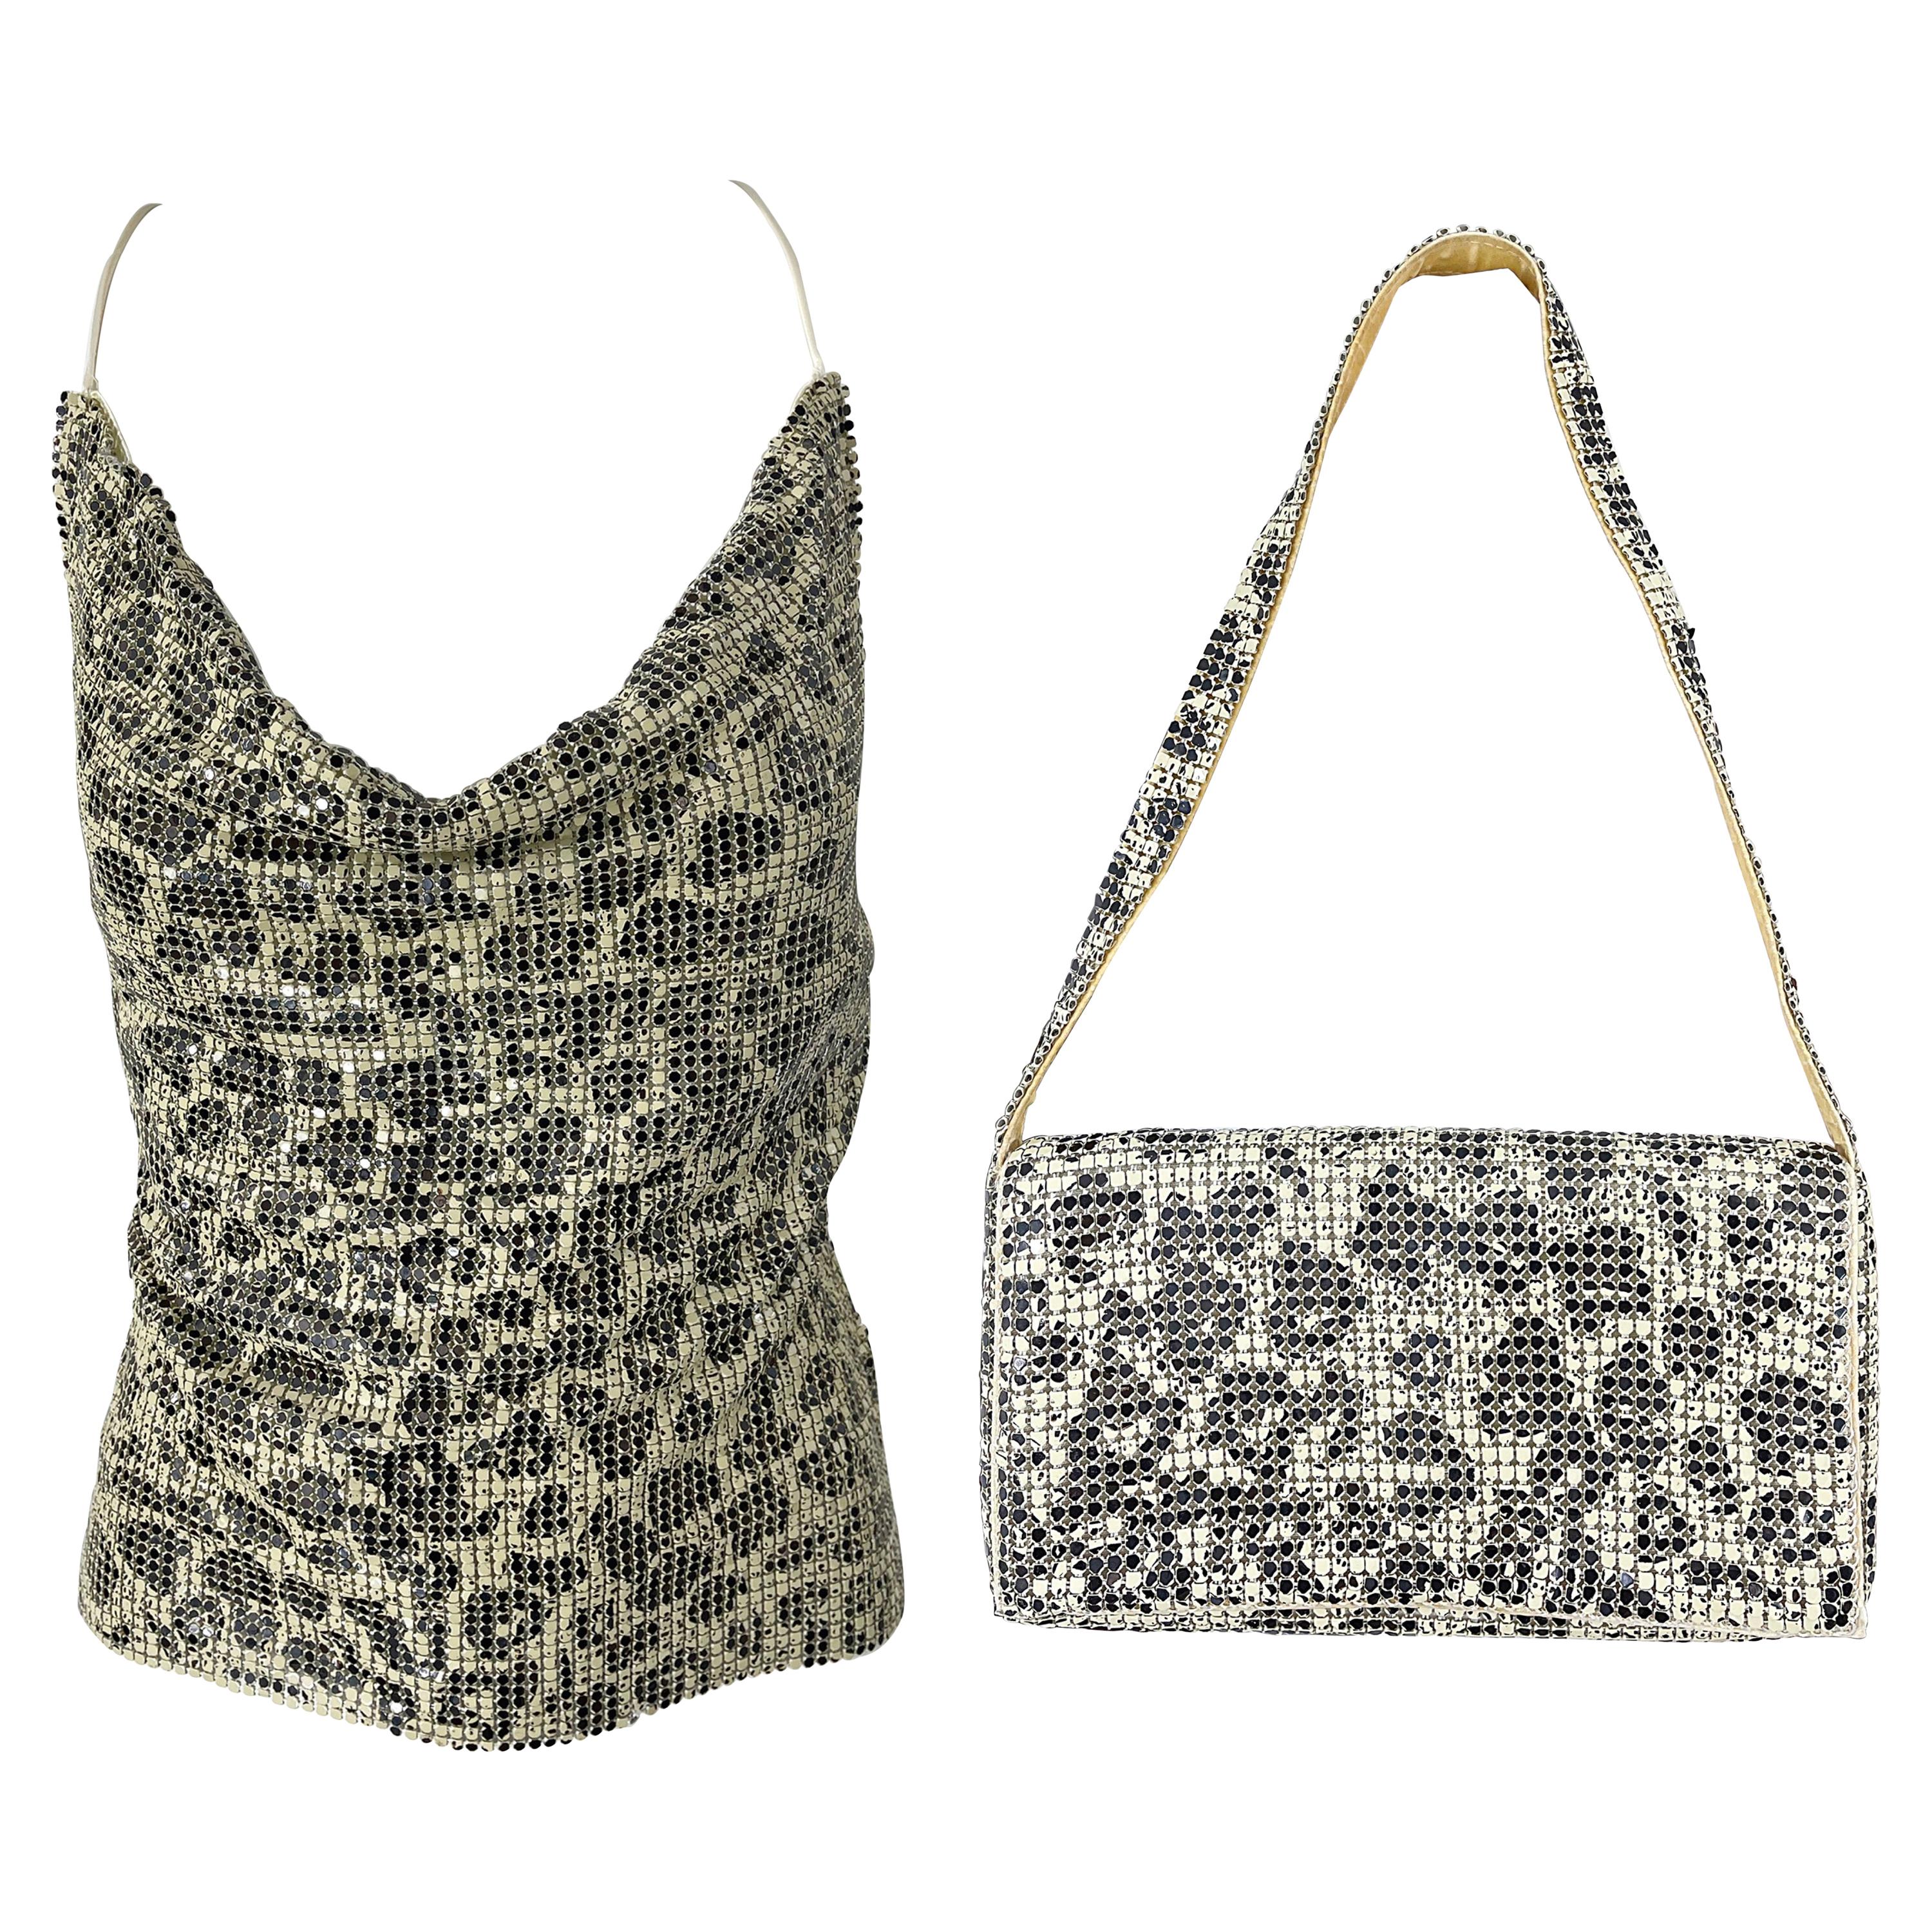 1990s Chainmail Black and White Leopard Animal Print Halter Top and Handbag Set